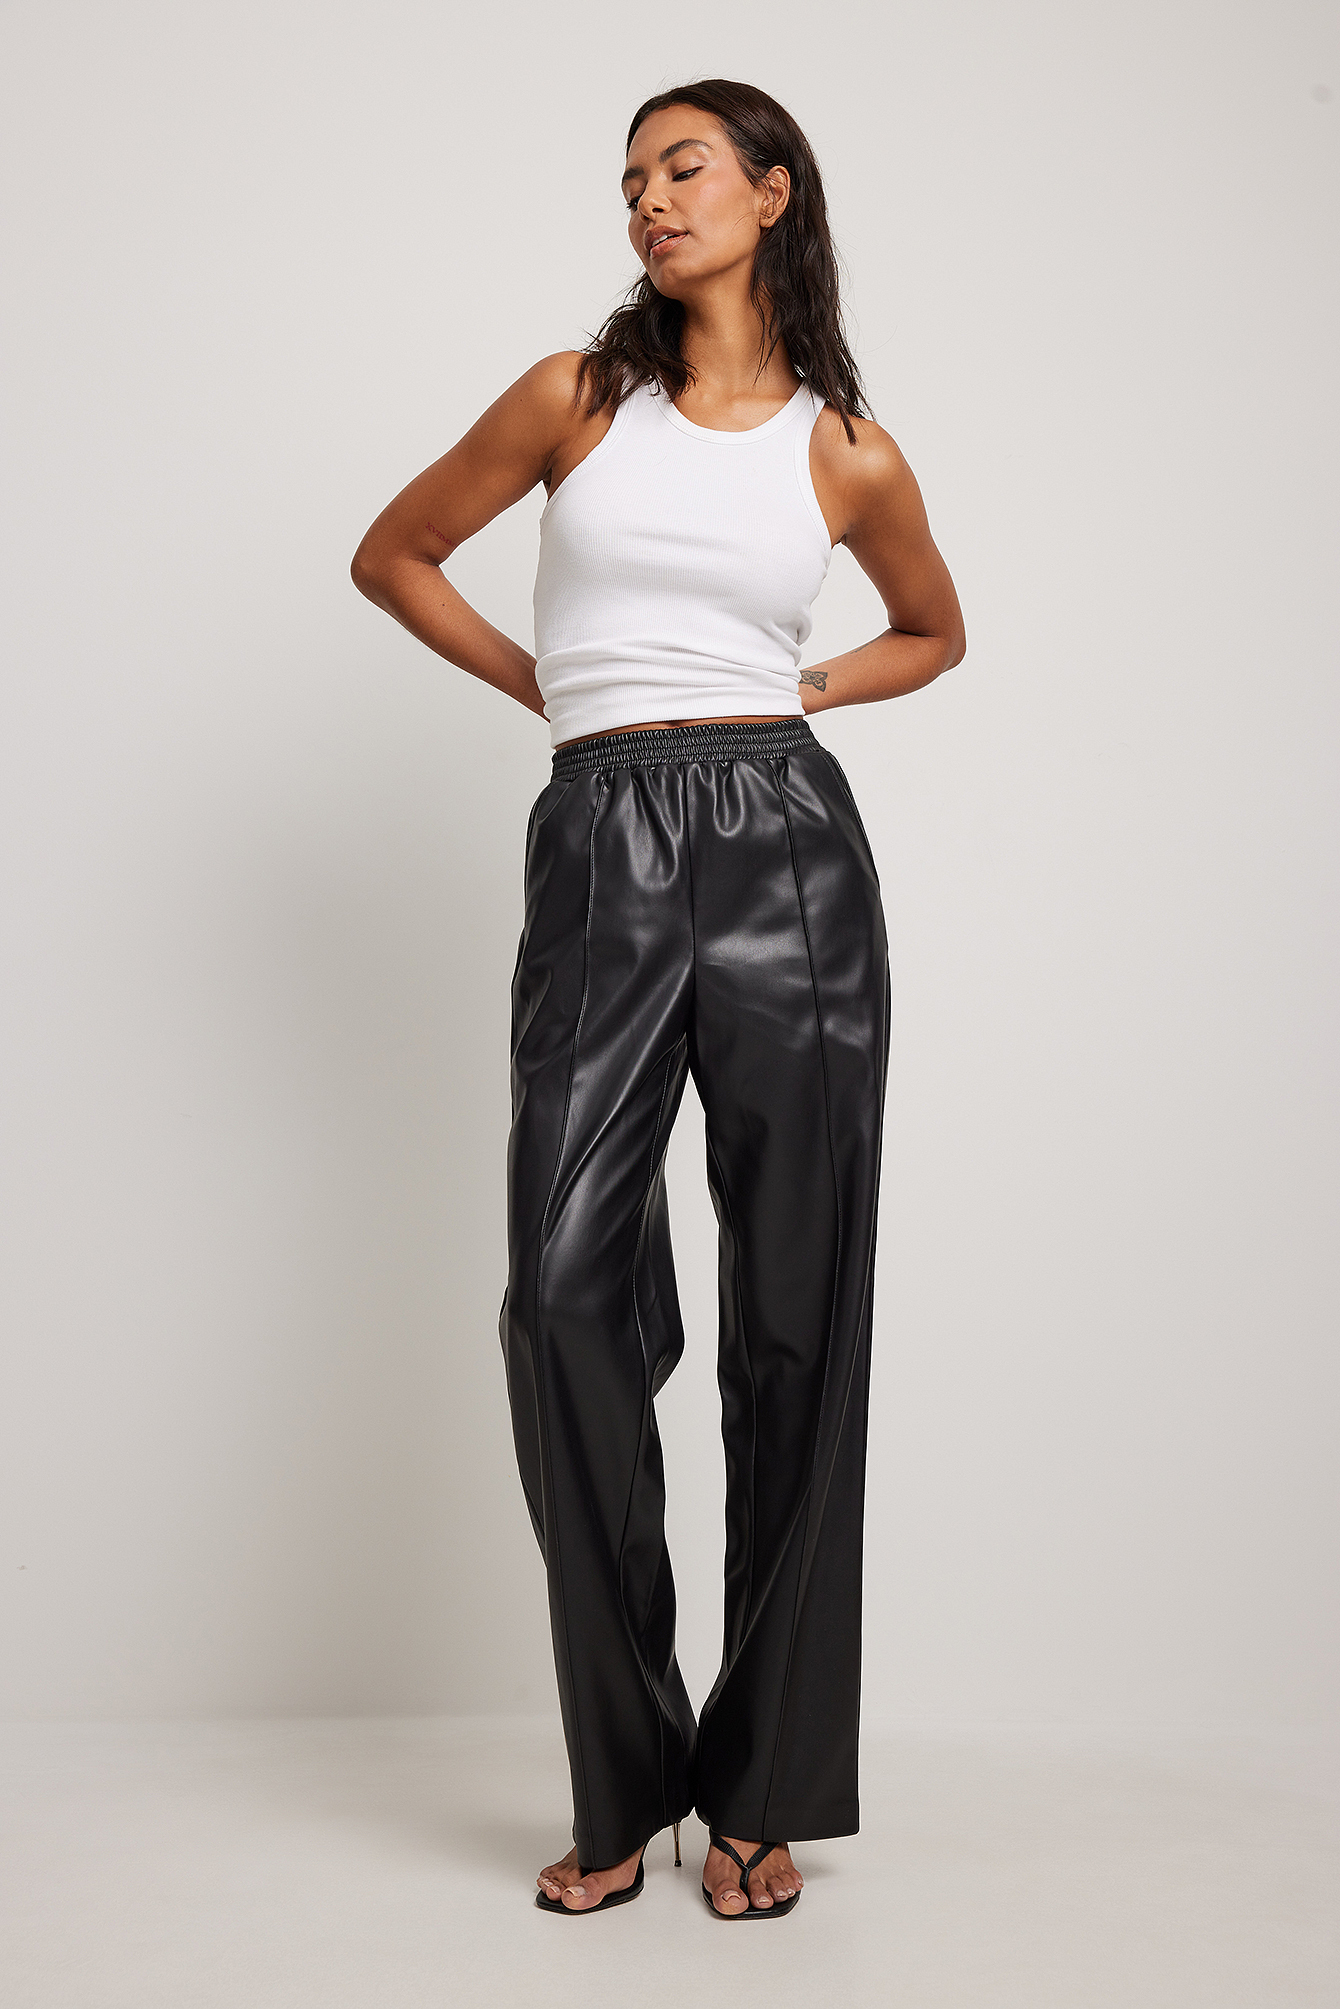 Elastic Waist PU Trousers Outfit